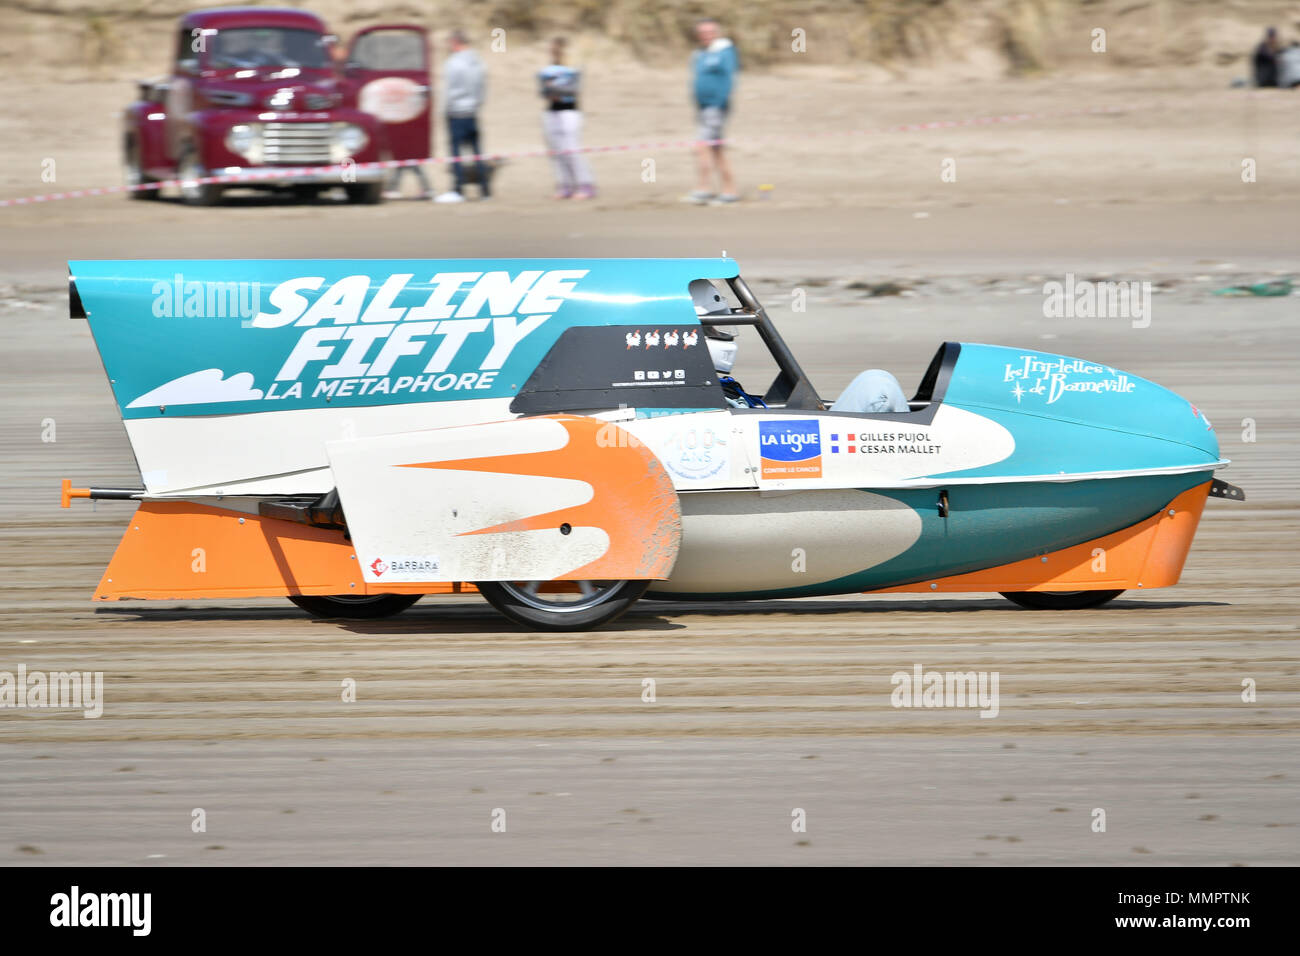 An electric side-car vehicle takes part in the annual UK, European and World land speed event organised by Straightliners, at Pendine Sands, Wales, where riders and drivers of all vehicle types compete in classes for top speeds over a measured mile on the beach. Stock Photo